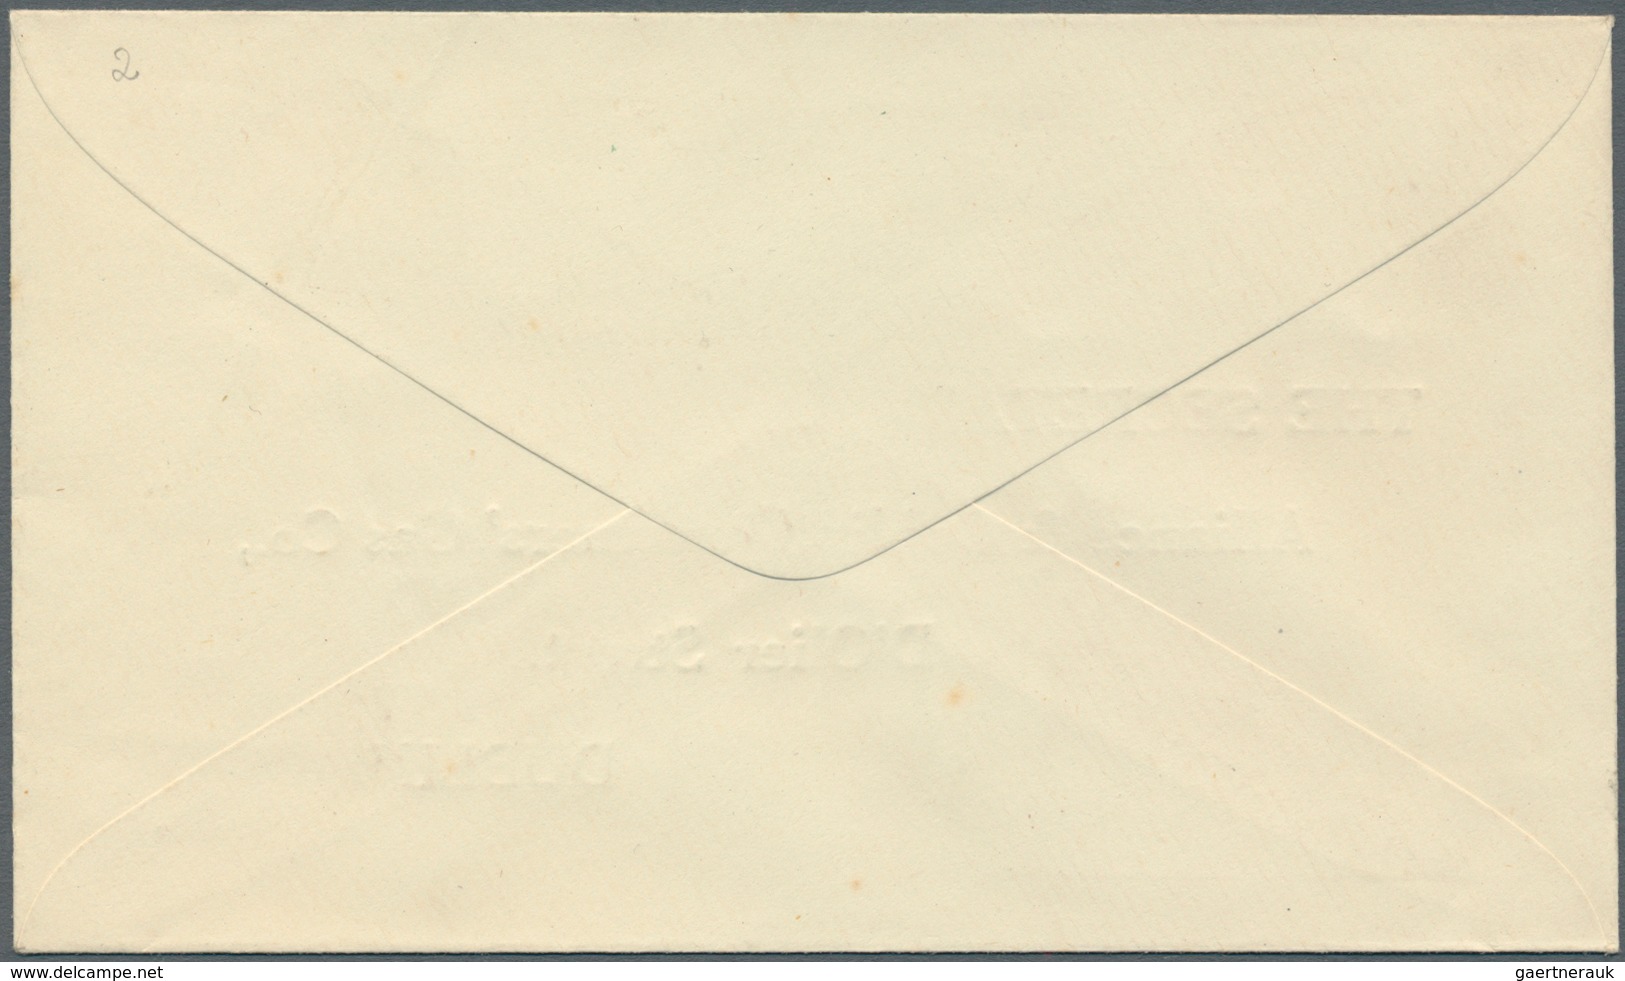 Irland - Ganzsachen: Alliance & Dublin Consumers' Gas Co., Dublin: 1/2 D. Pale Green, 1 D. Red And 2 - Postal Stationery